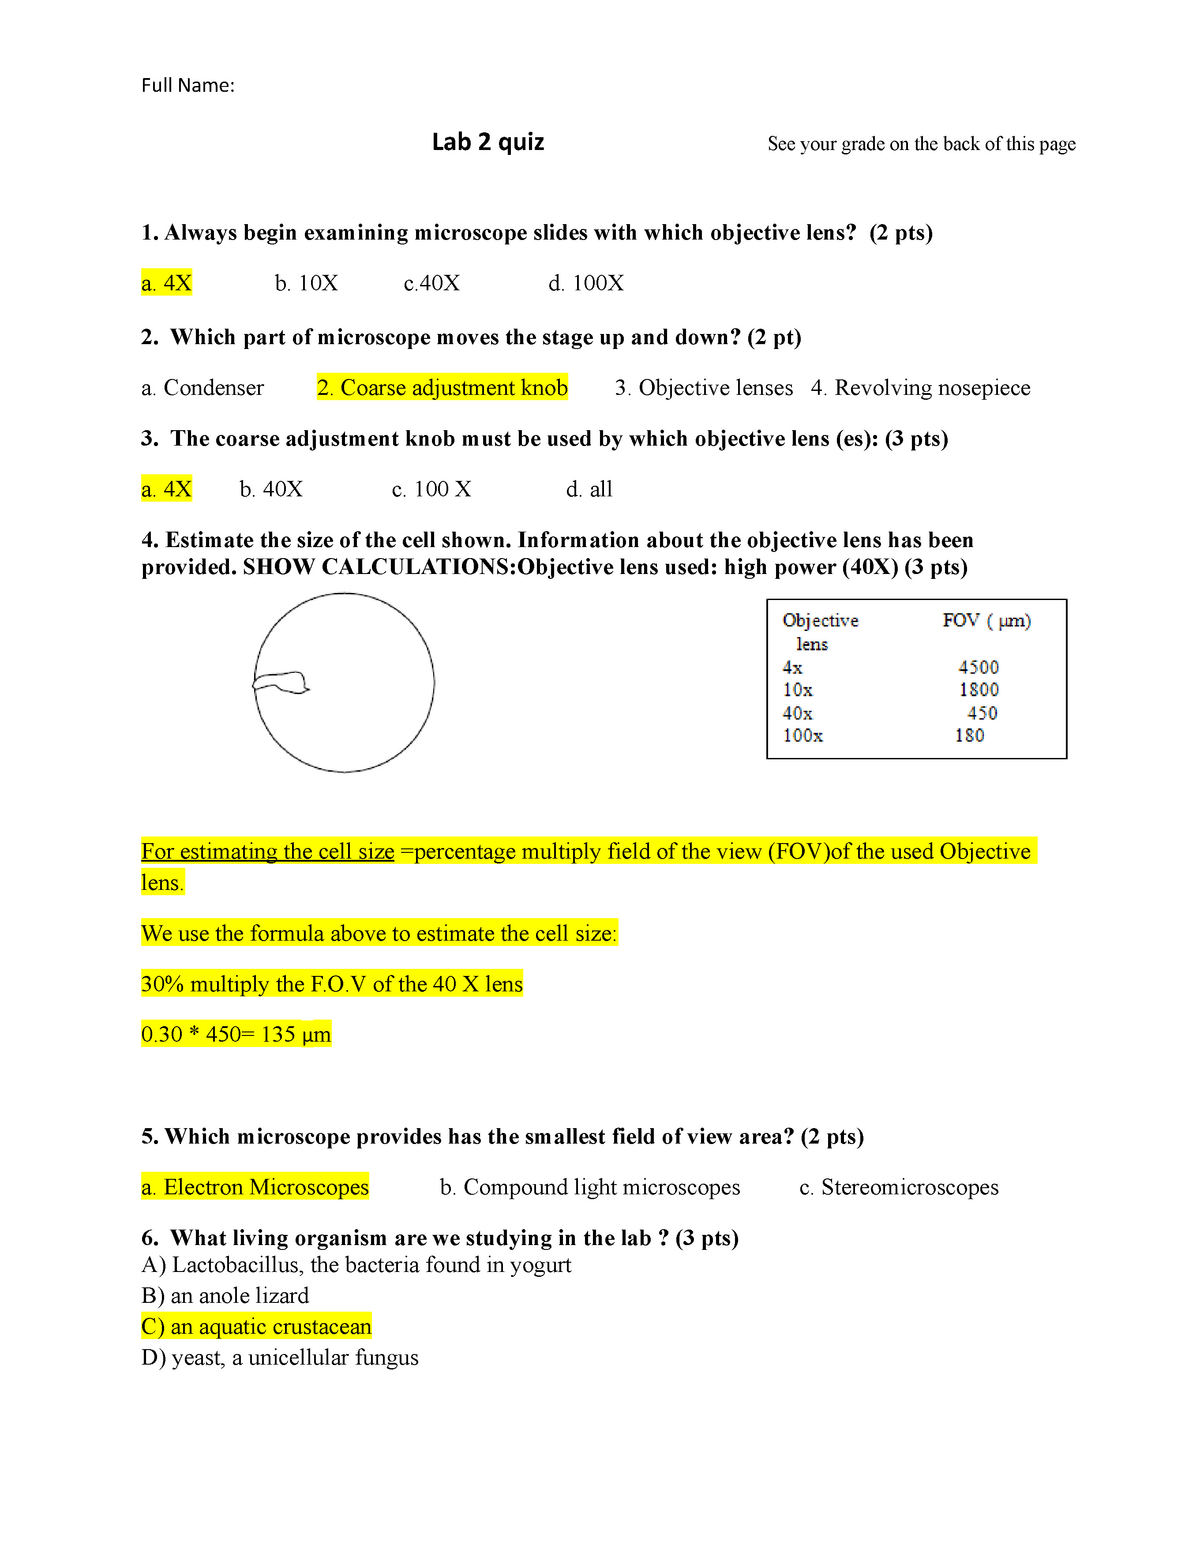 Lab 2 Microscopy quiz with answer key - Full Name: Lab 2 quiz See your  grade on the back of this - StuDocu